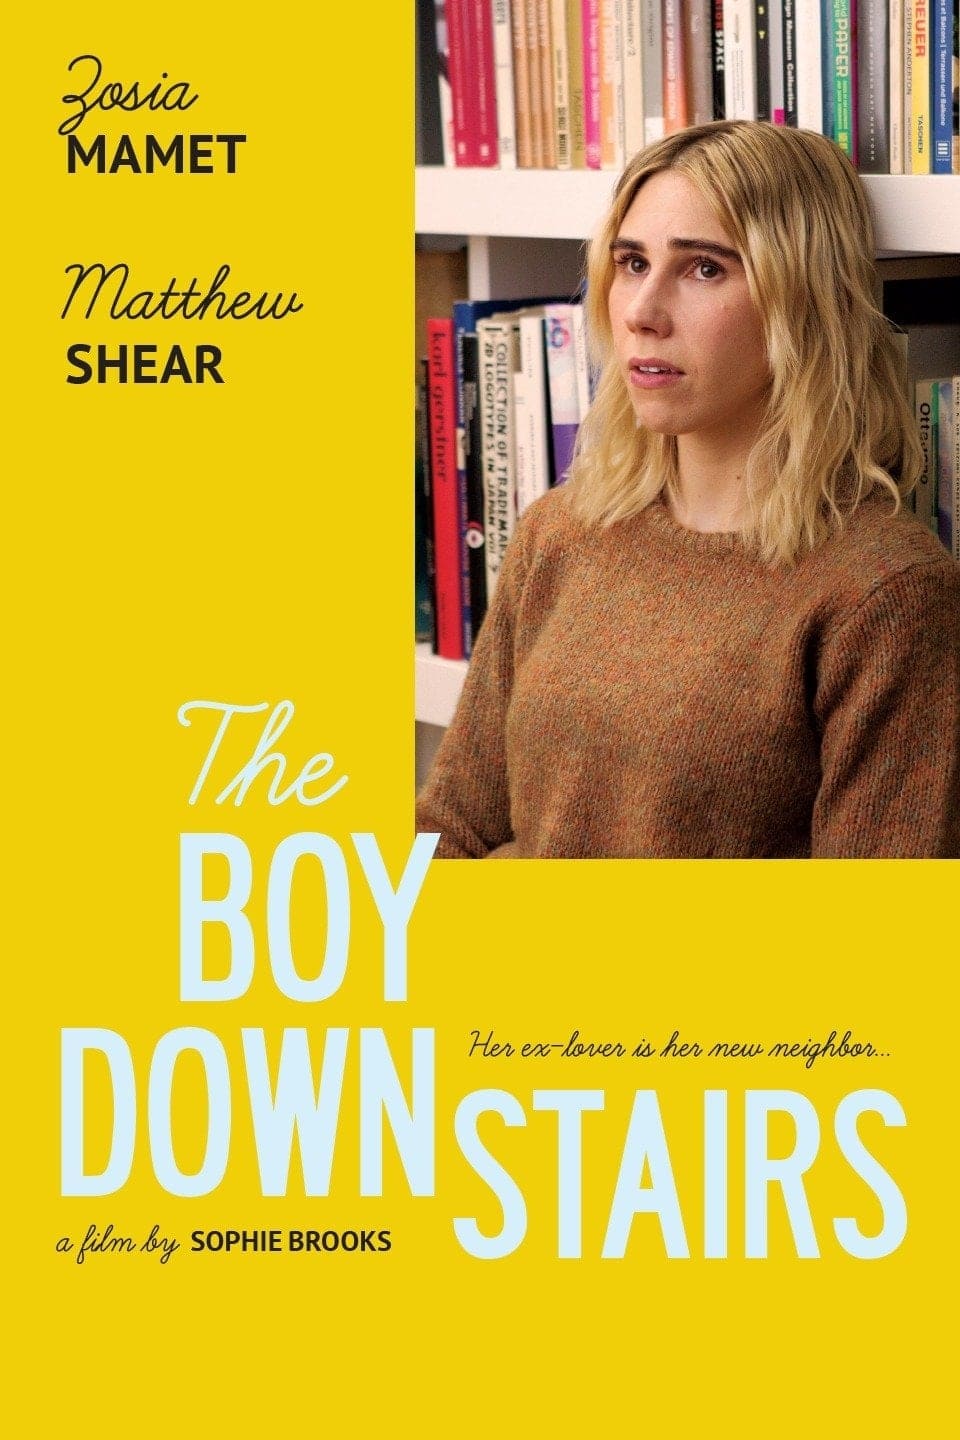 The Boy Downstairs (2019)